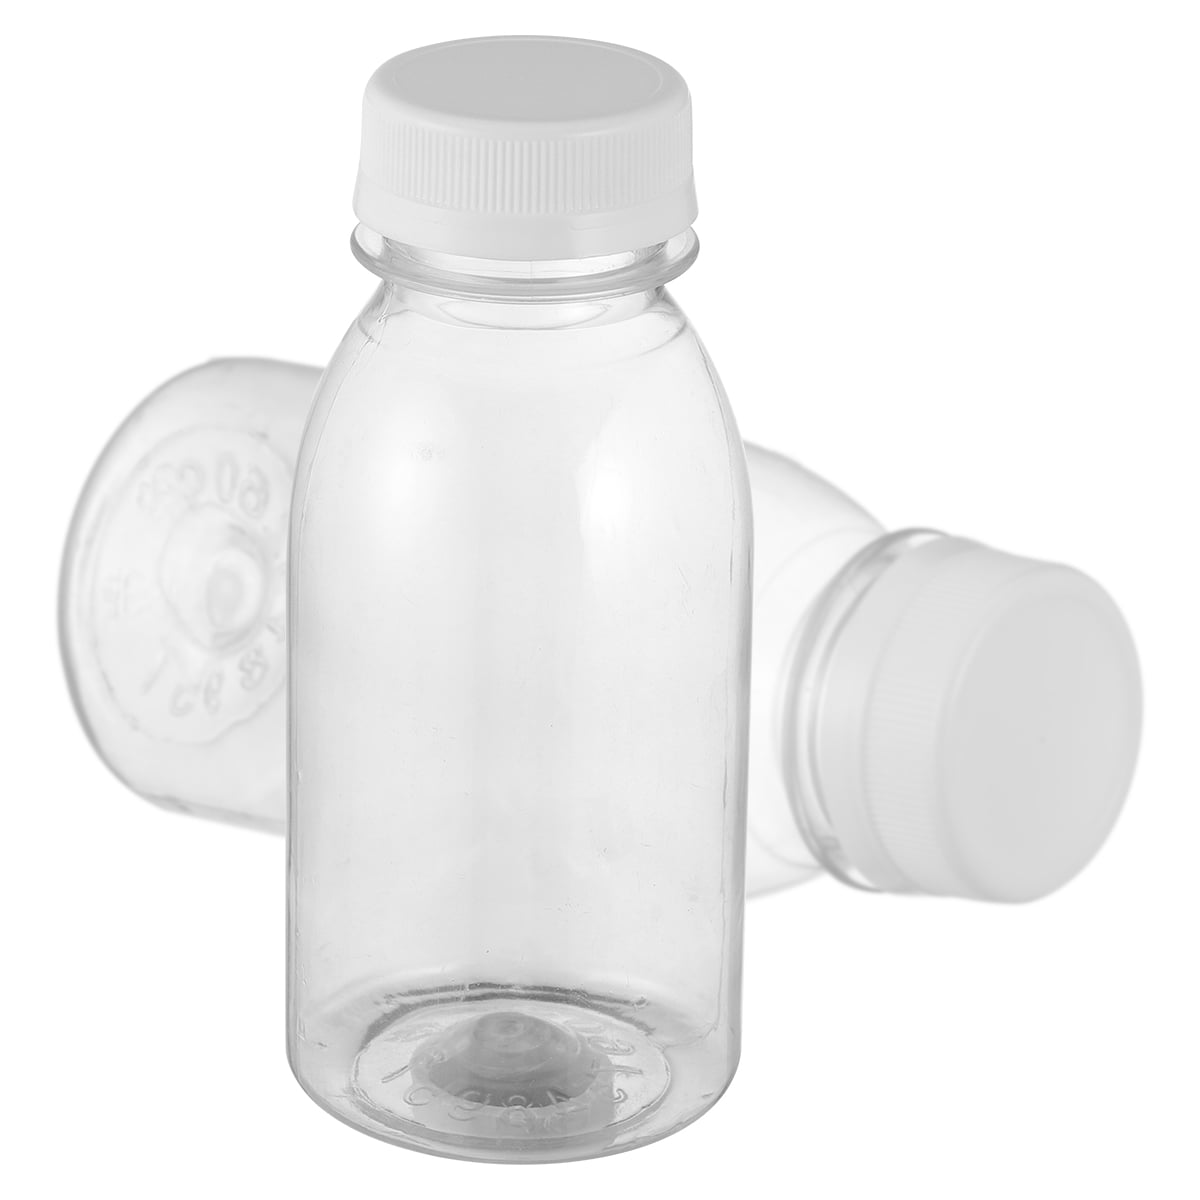  4 Ounce Mini Bottles for Mini Fridge, Reusable Juice Containers  with White Caps, Small Bottle for Liquids in Kids Lunch Box, Clear Empty  Plastic Container with Lids for Juicing (12 Pack) 